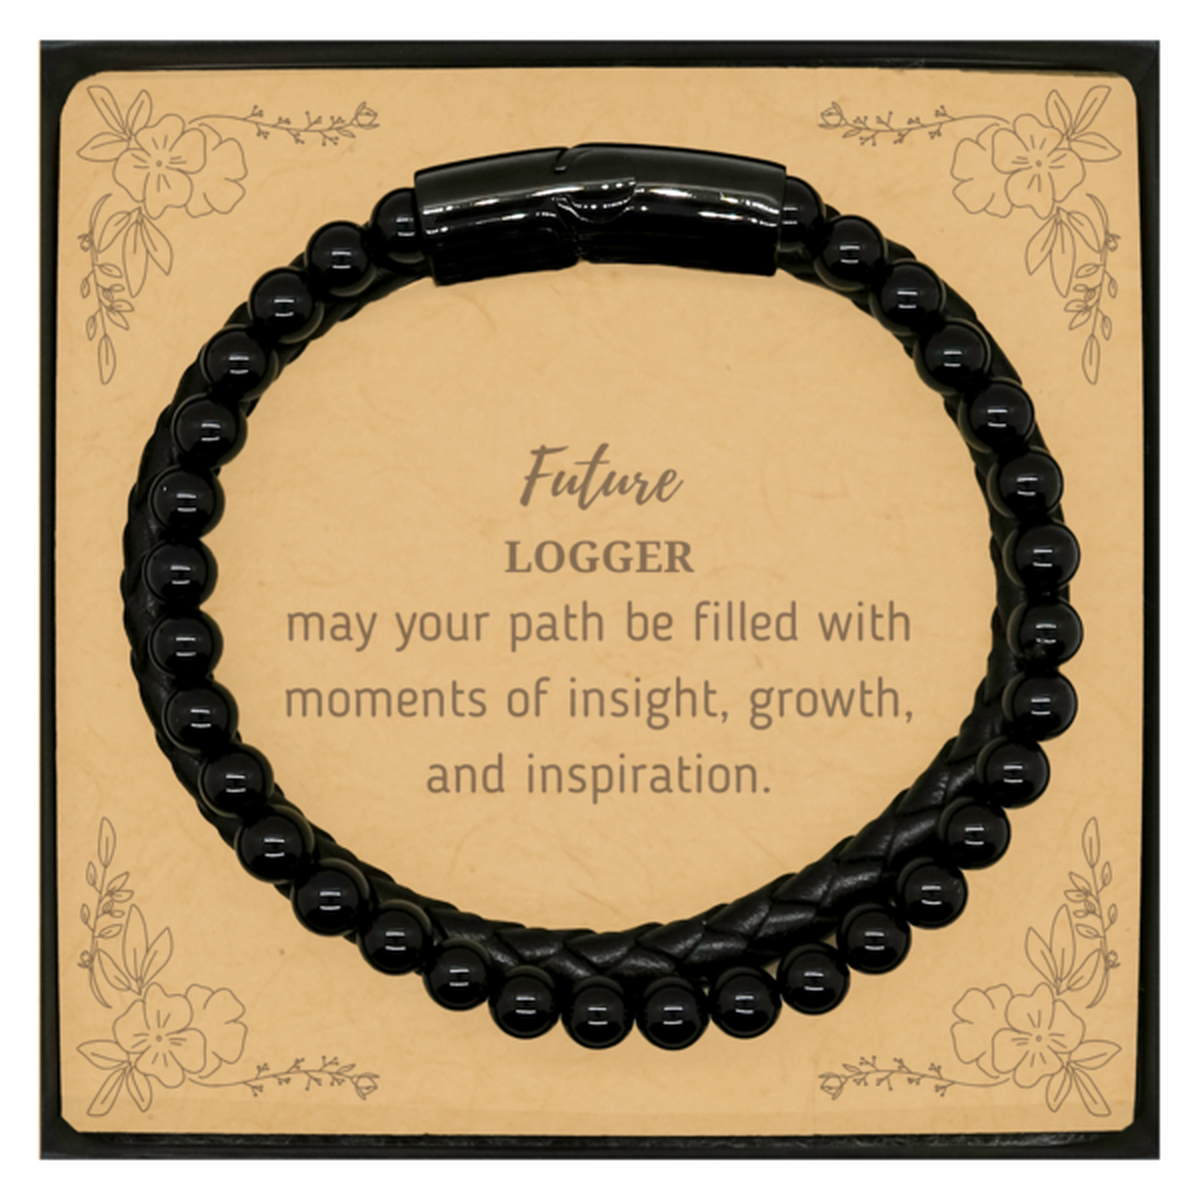 Future Logger Gifts, May your path be filled with moments of insight, Graduation Gifts for New Logger, Christmas Unique Stone Leather Bracelets For Men, Women, Friends